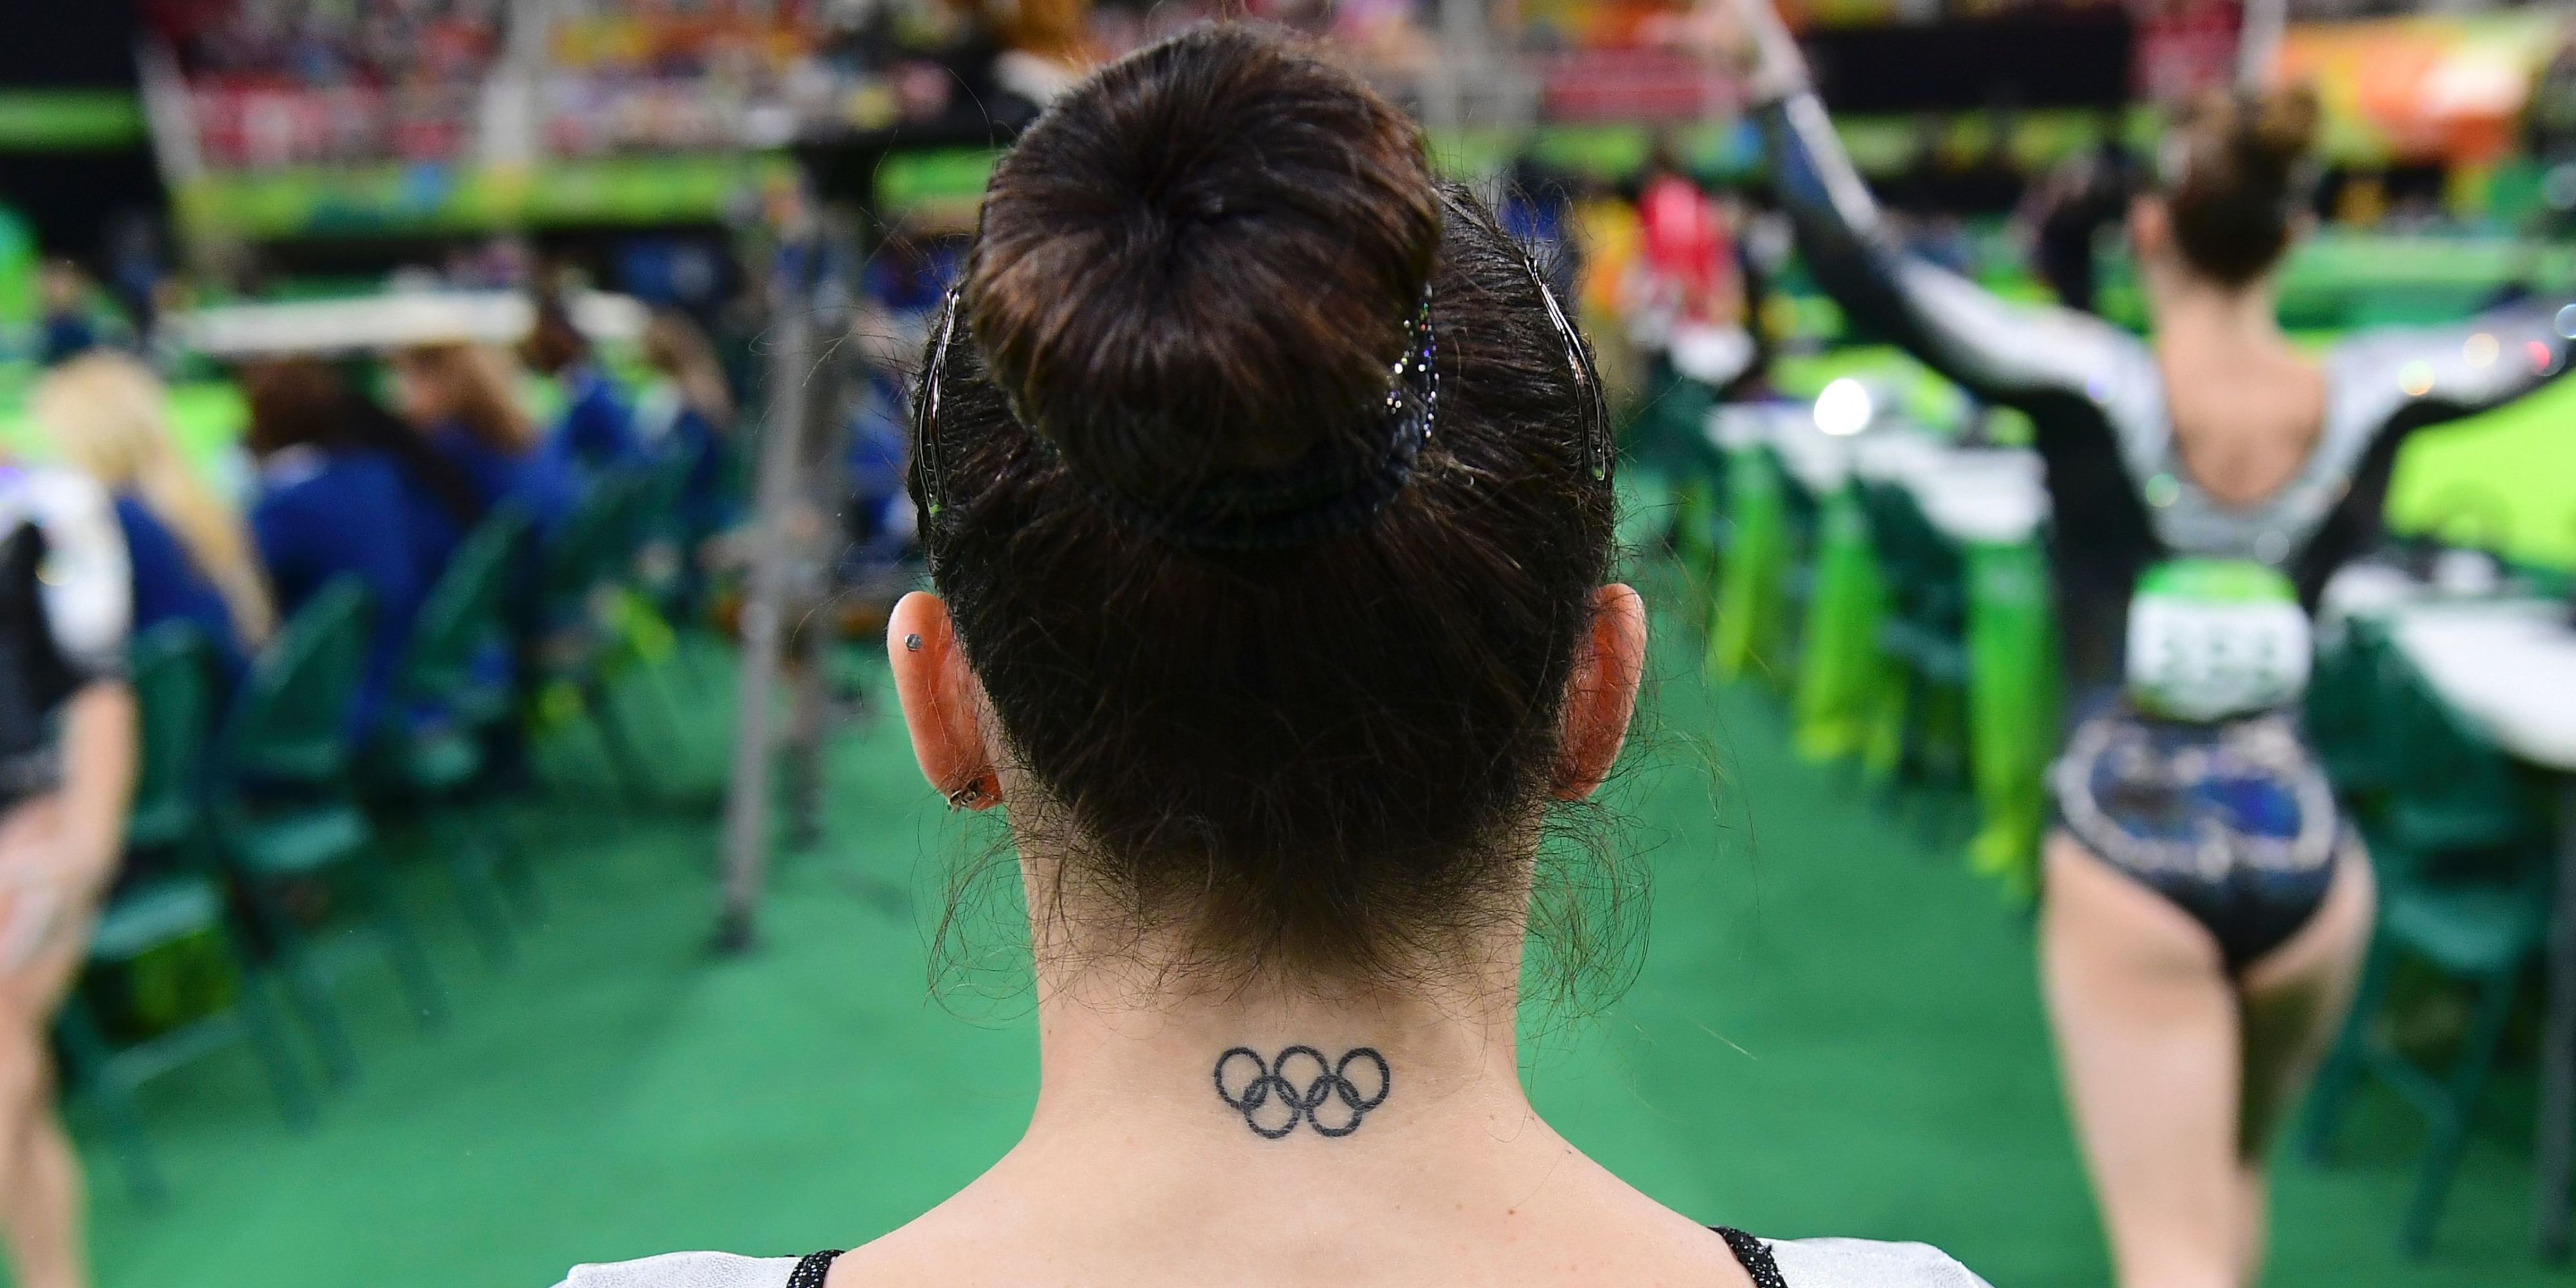 Archery Tattoos: Bow and Arrow Ink | HuffPost Sports